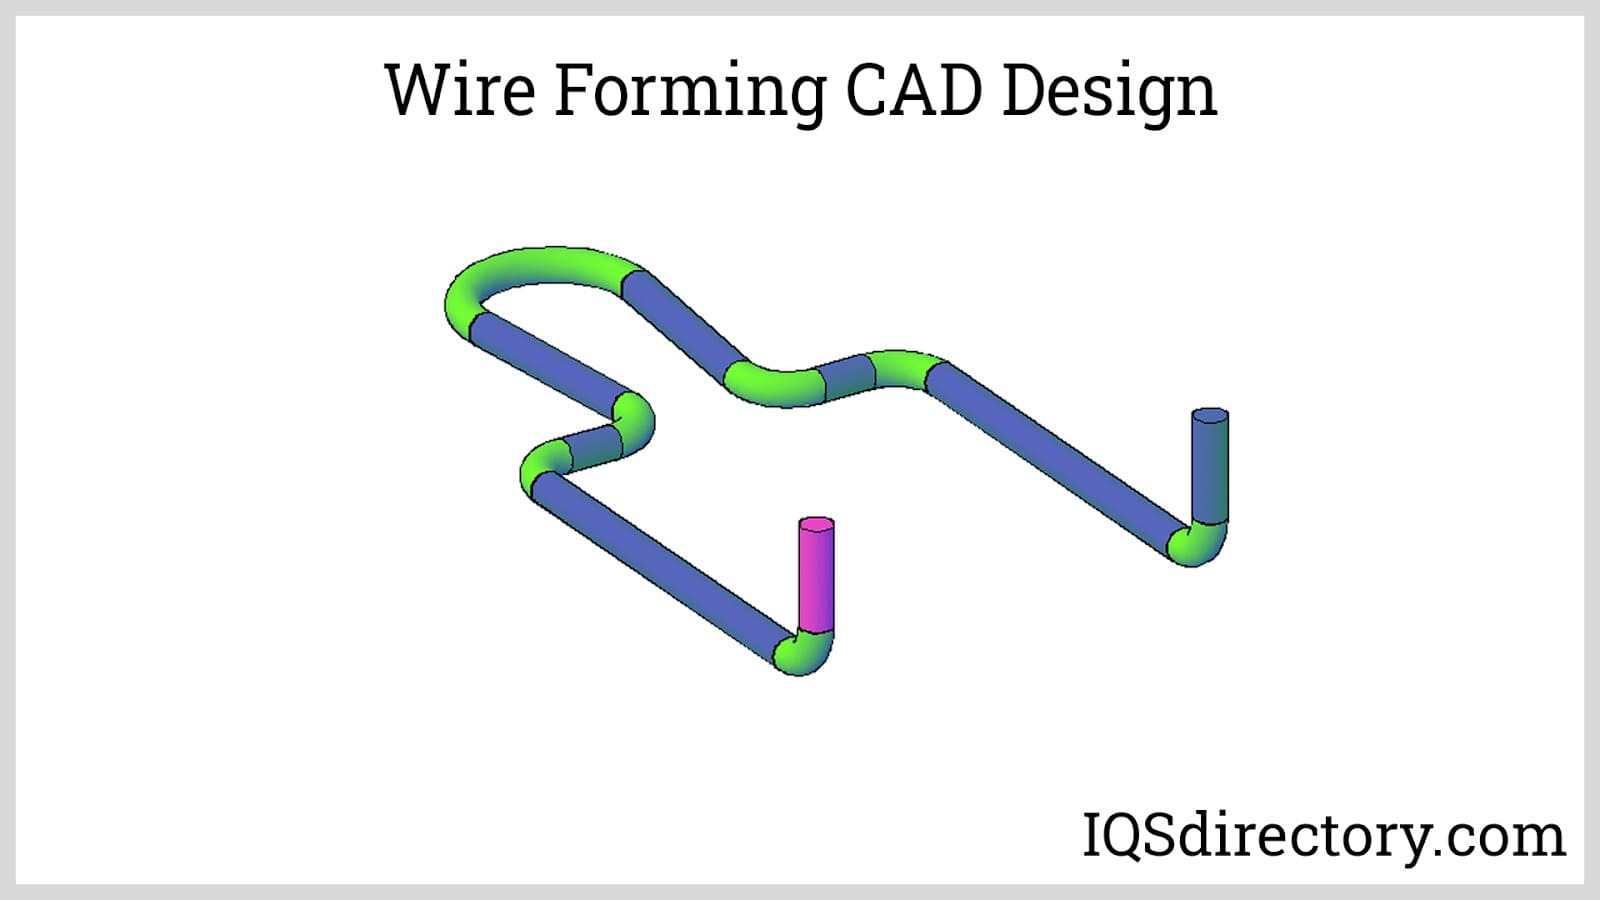 What Is The Difference Between Wire Forming And Bending?